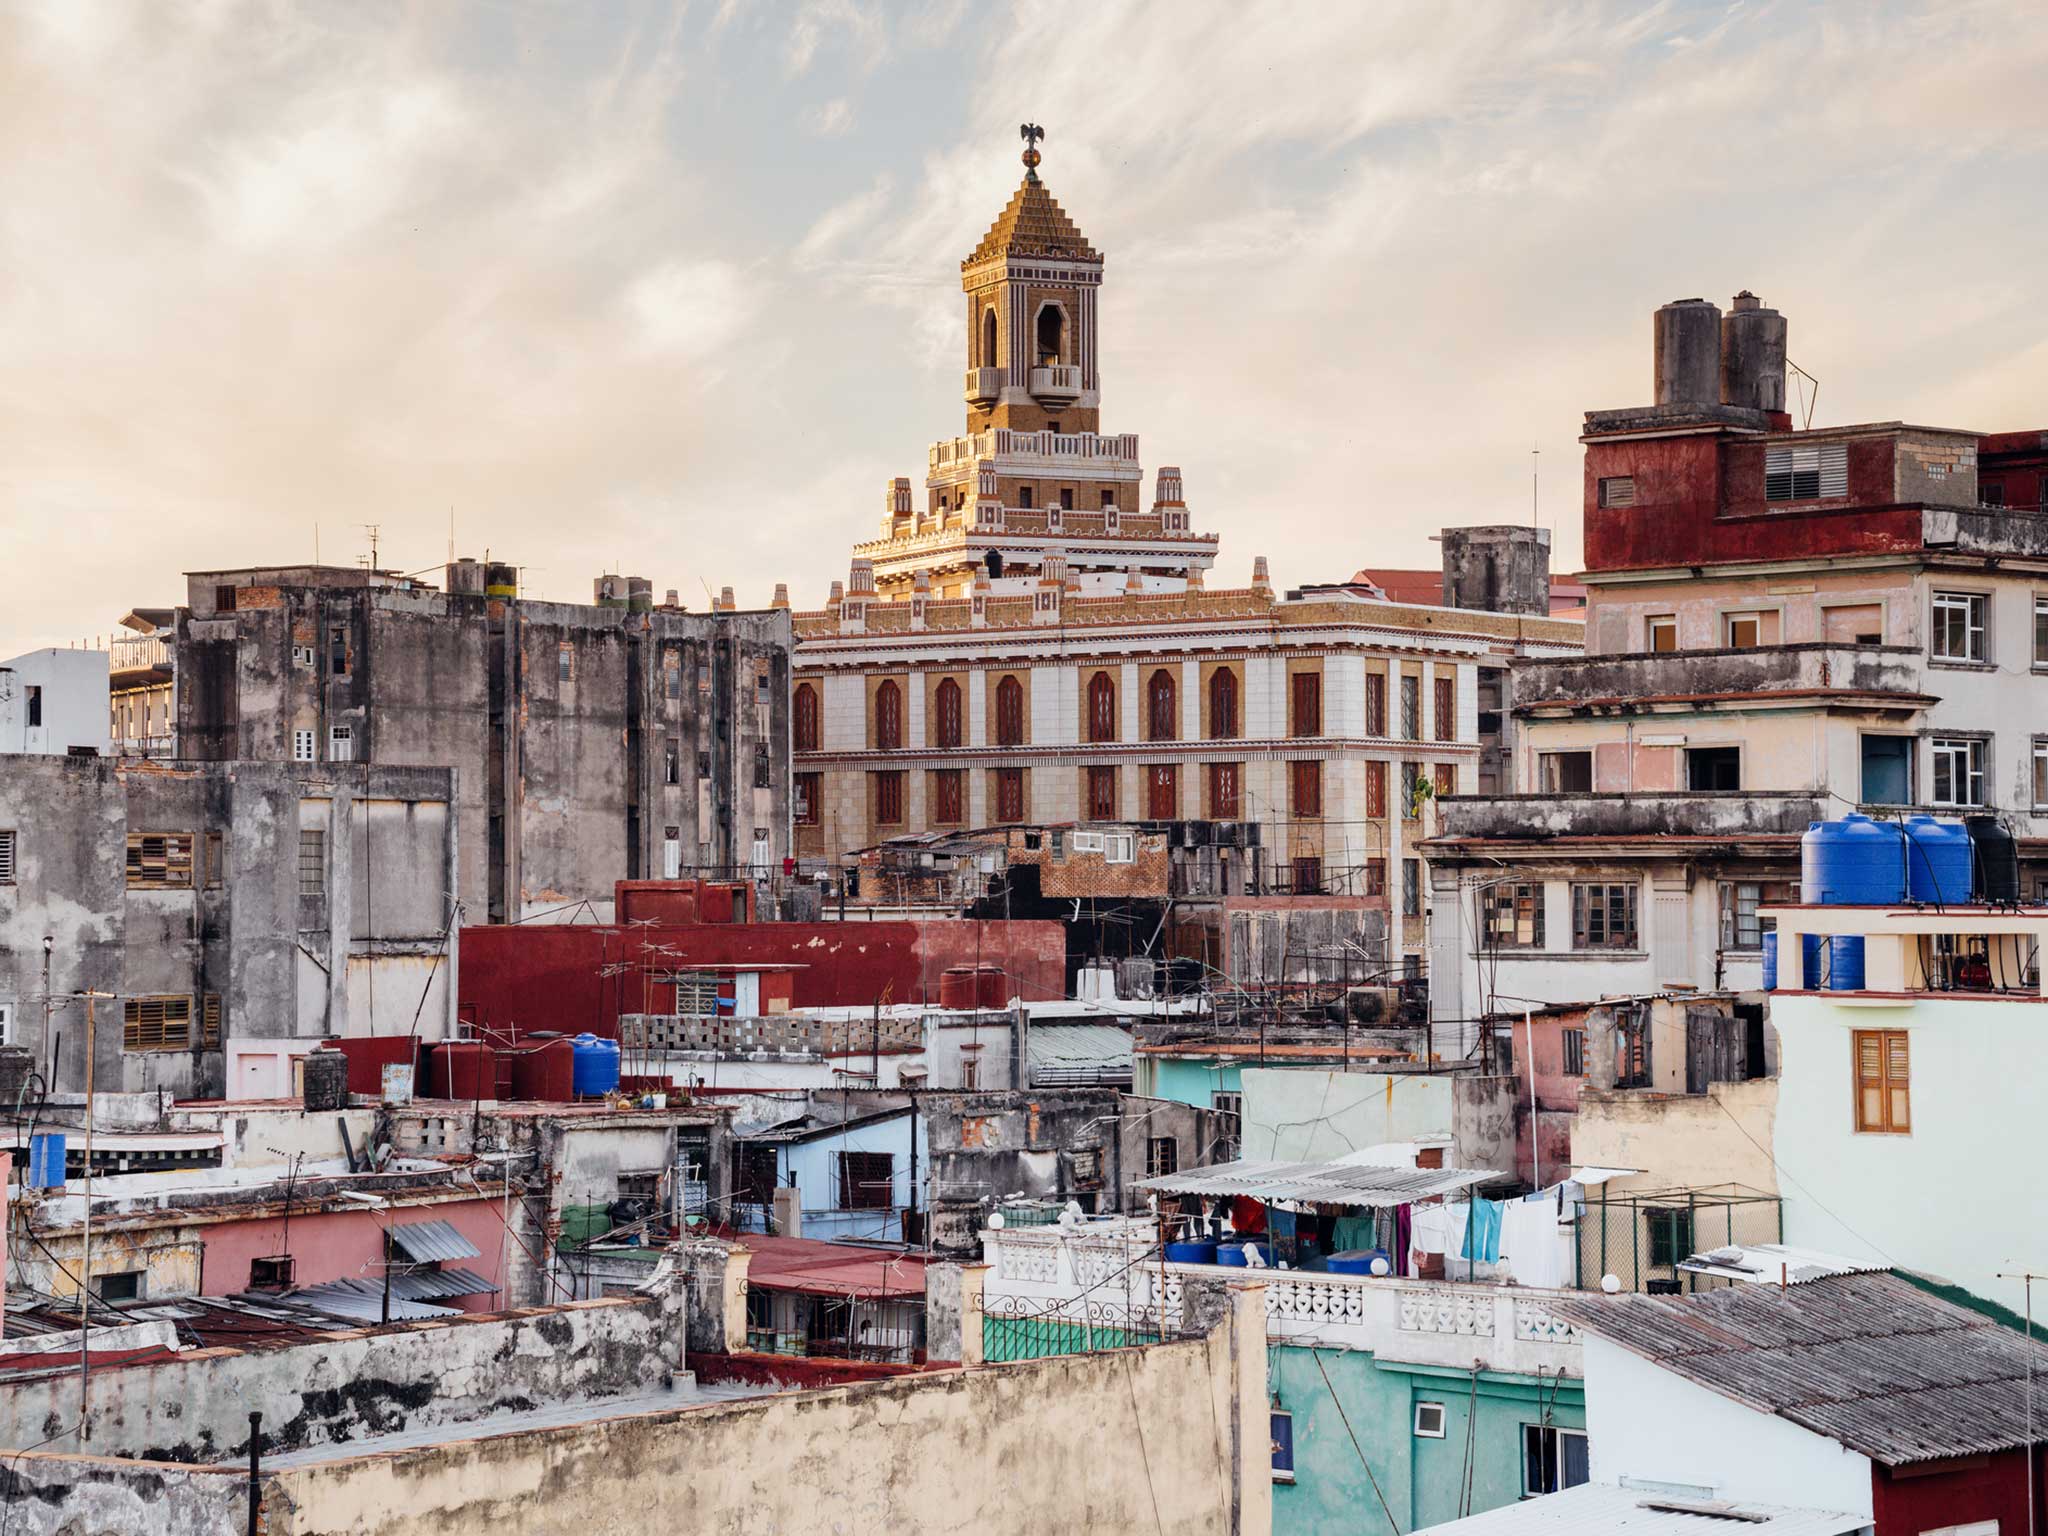 Havana architecture is a beguiling blend of shabby and chic